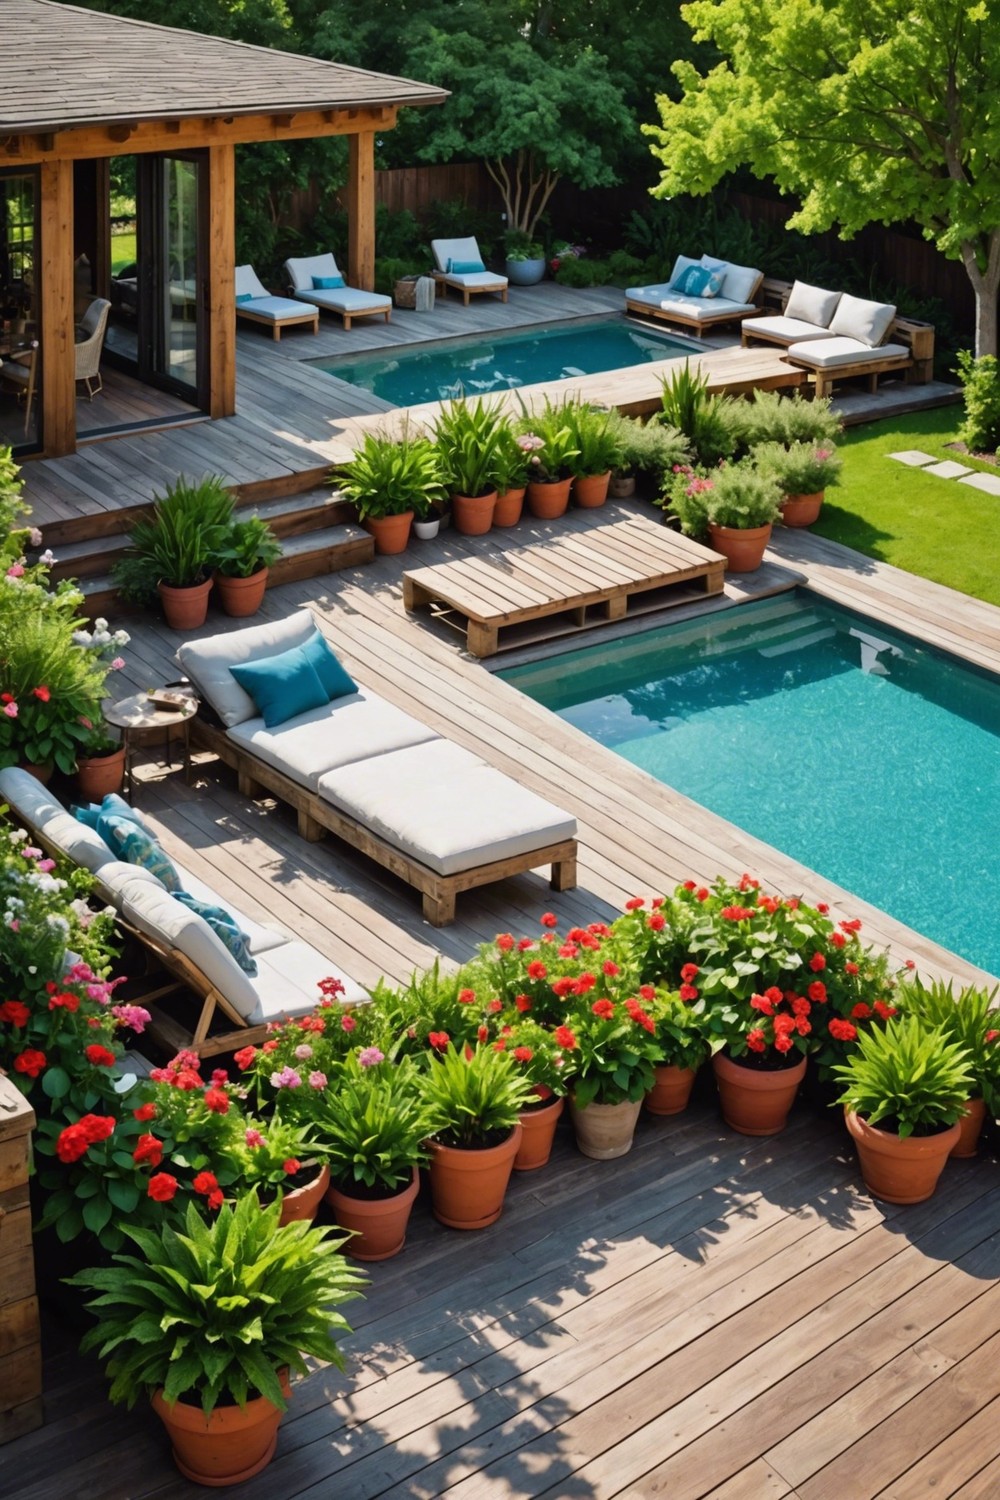 Pallet Pool Decks with Built-in Planters